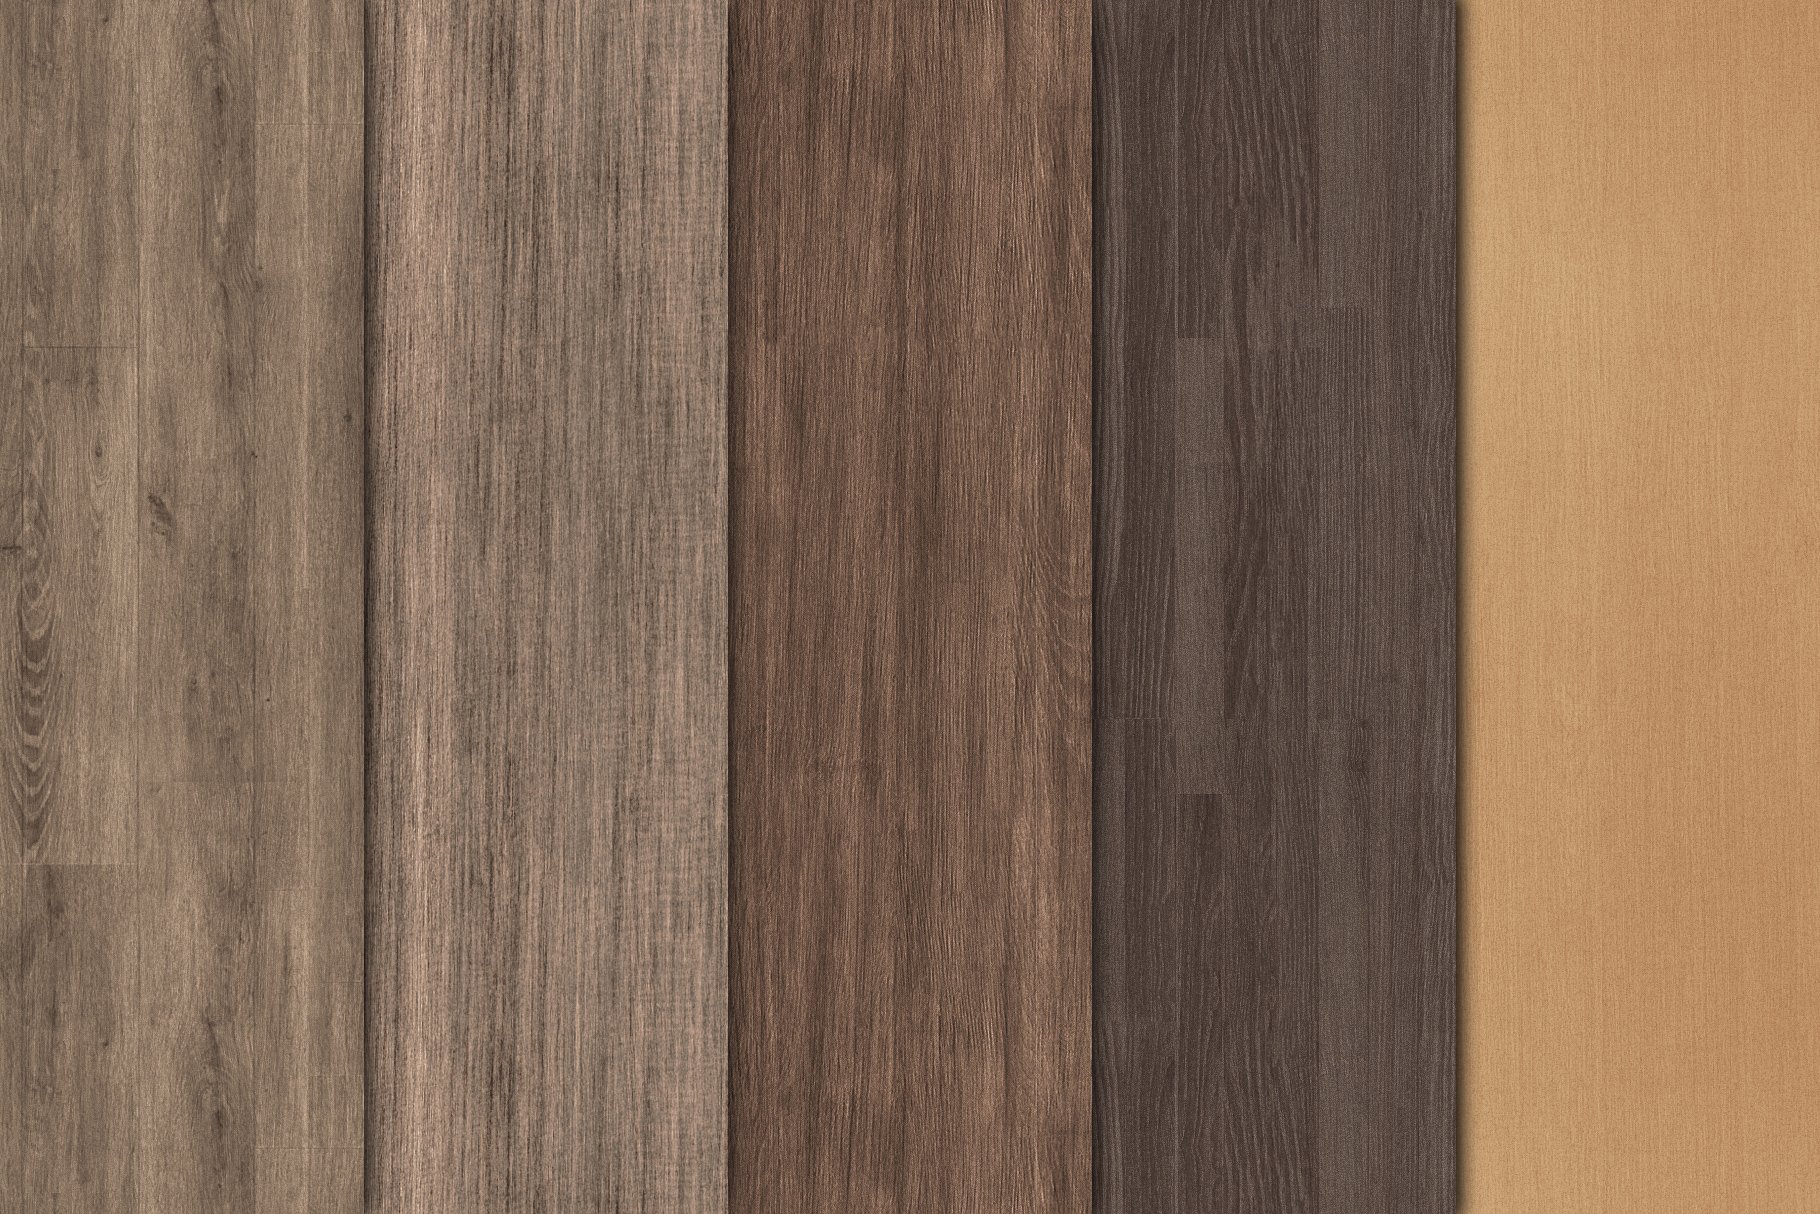 seamless wood textures preview 10 470